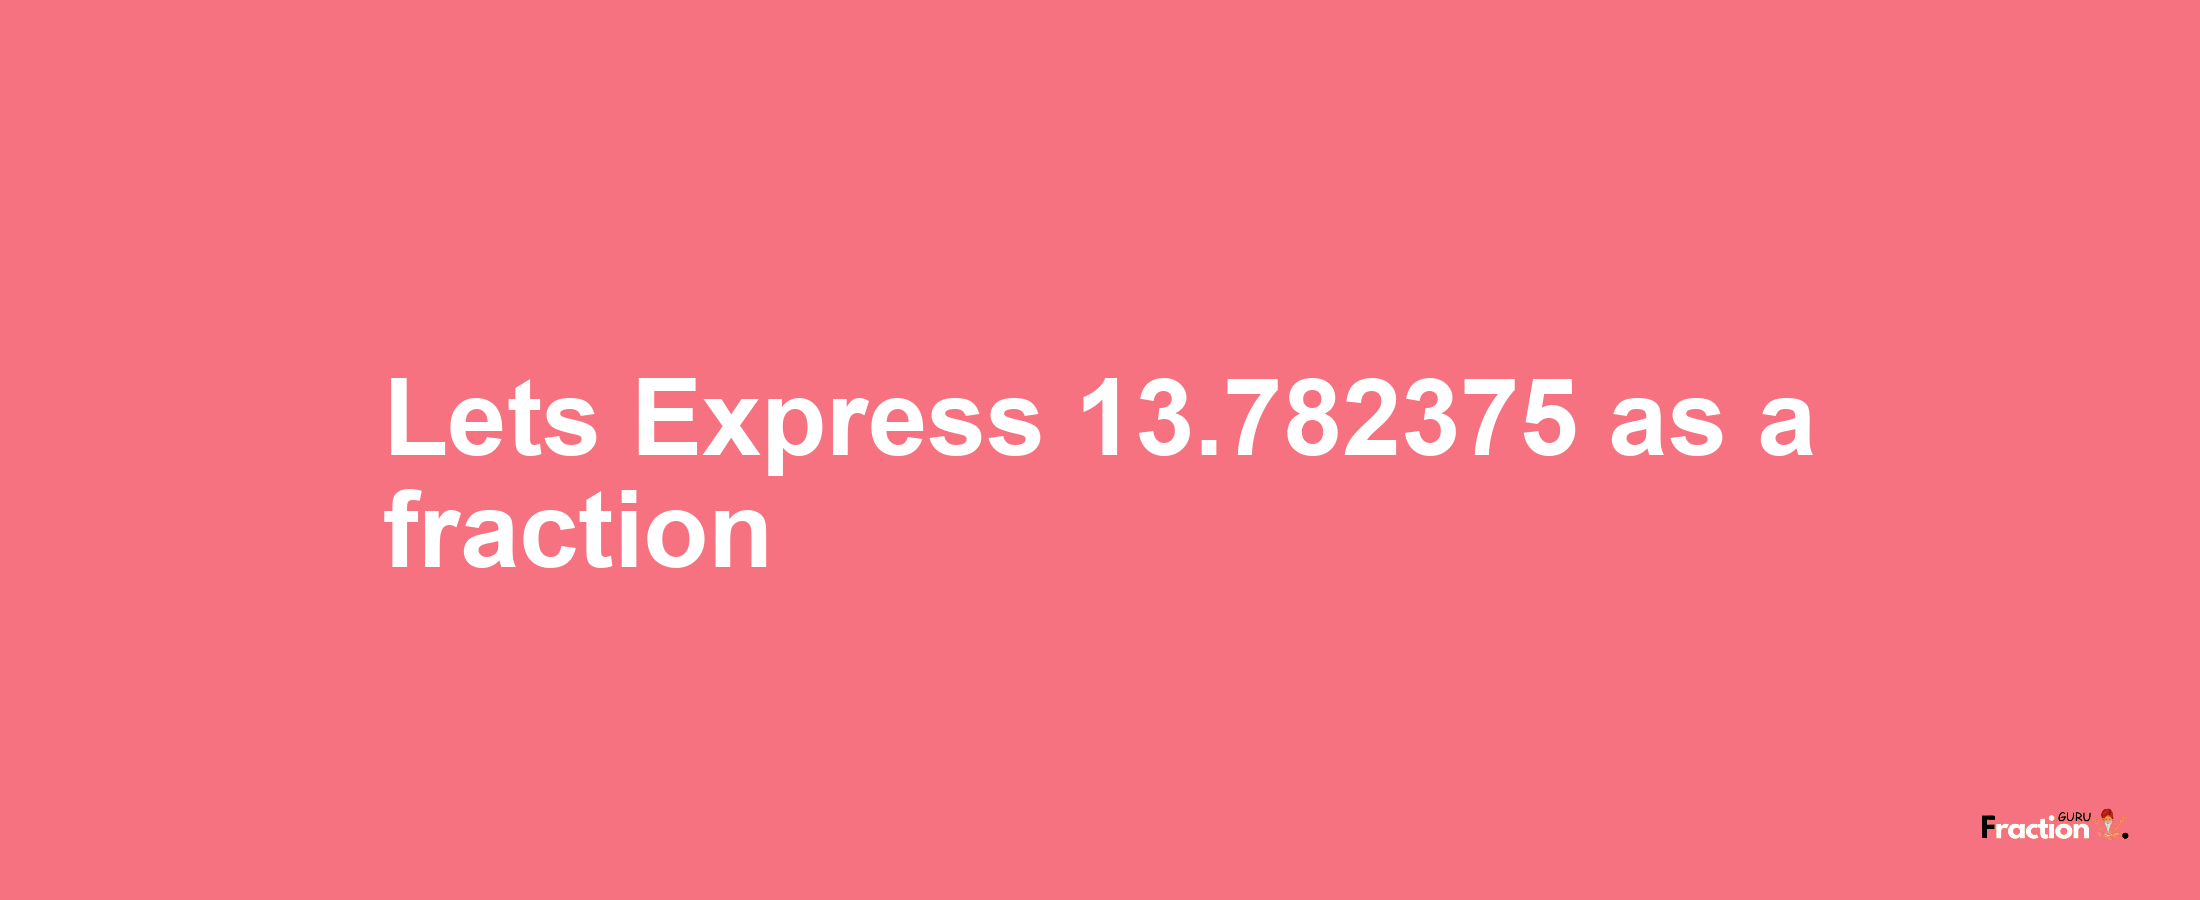 Lets Express 13.782375 as afraction